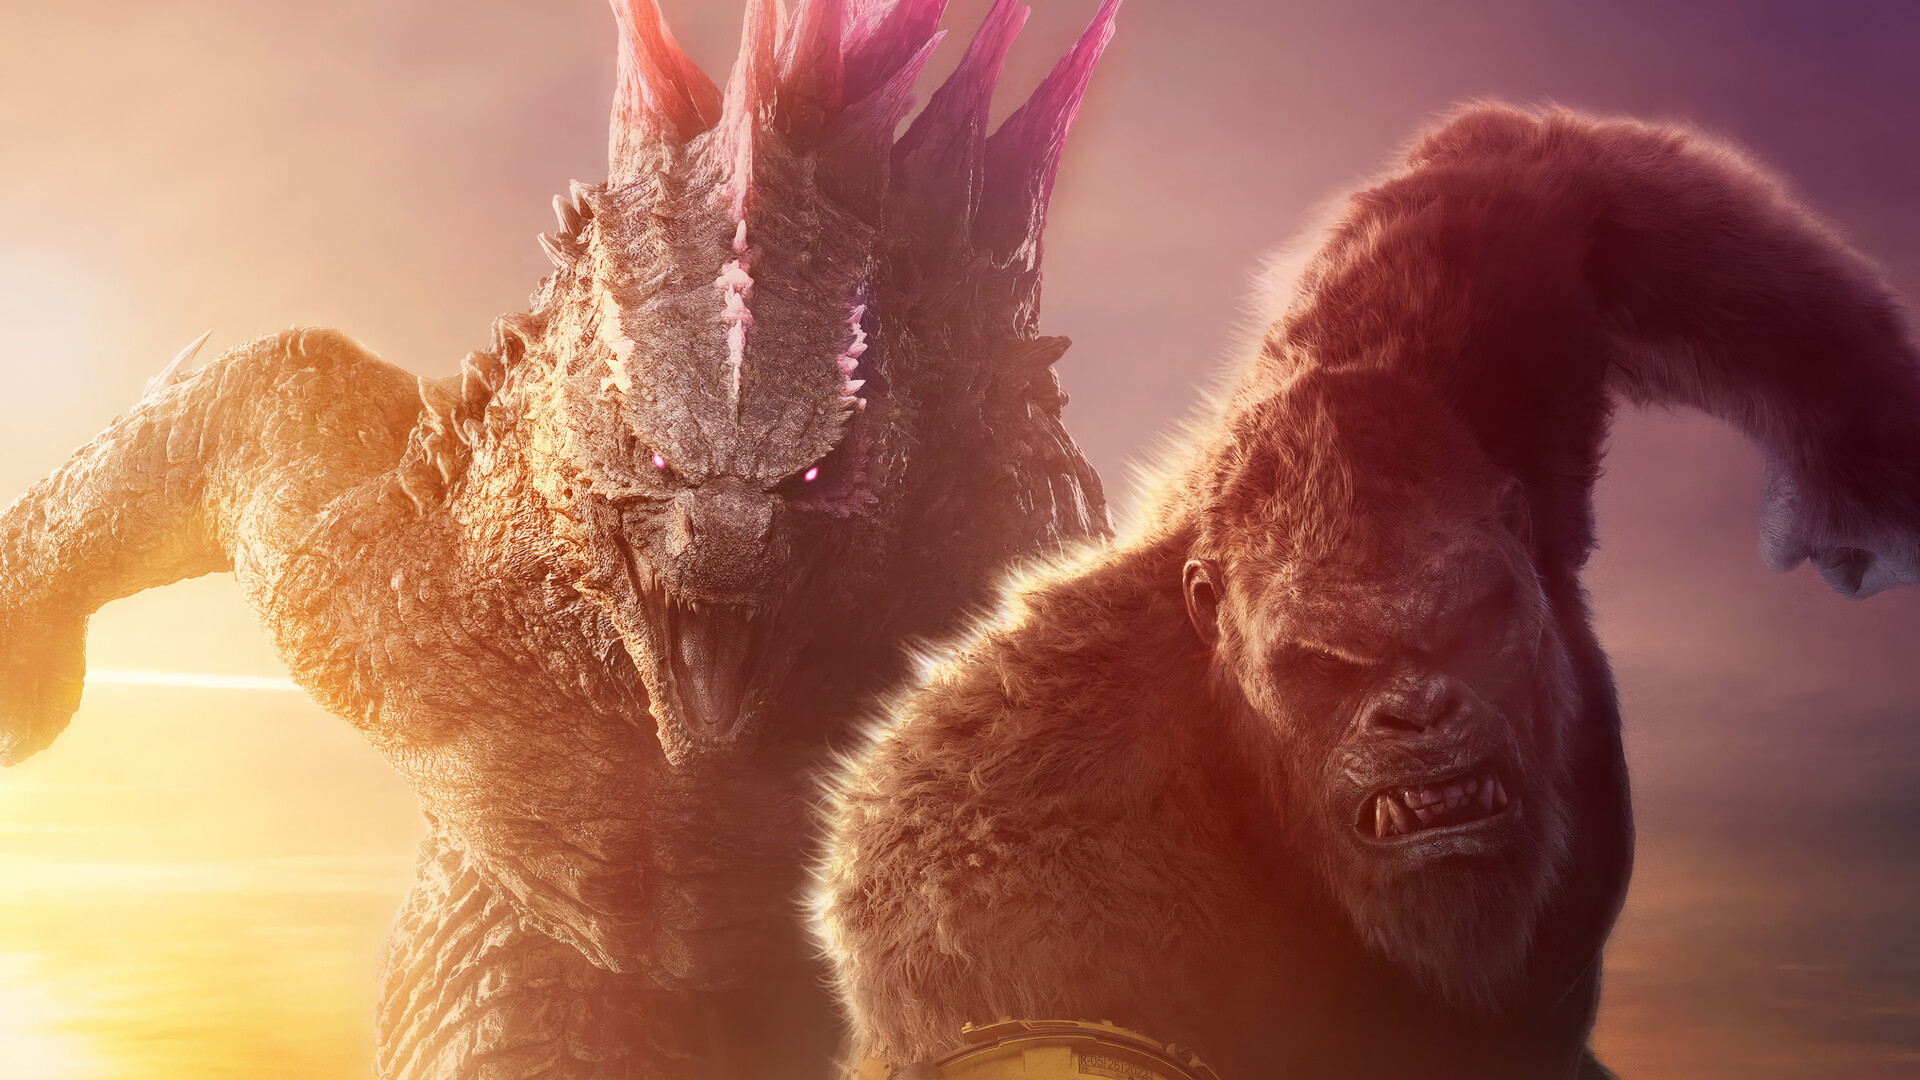 “Godzilla x Kong: The New Empire” released in TrueCut Motion